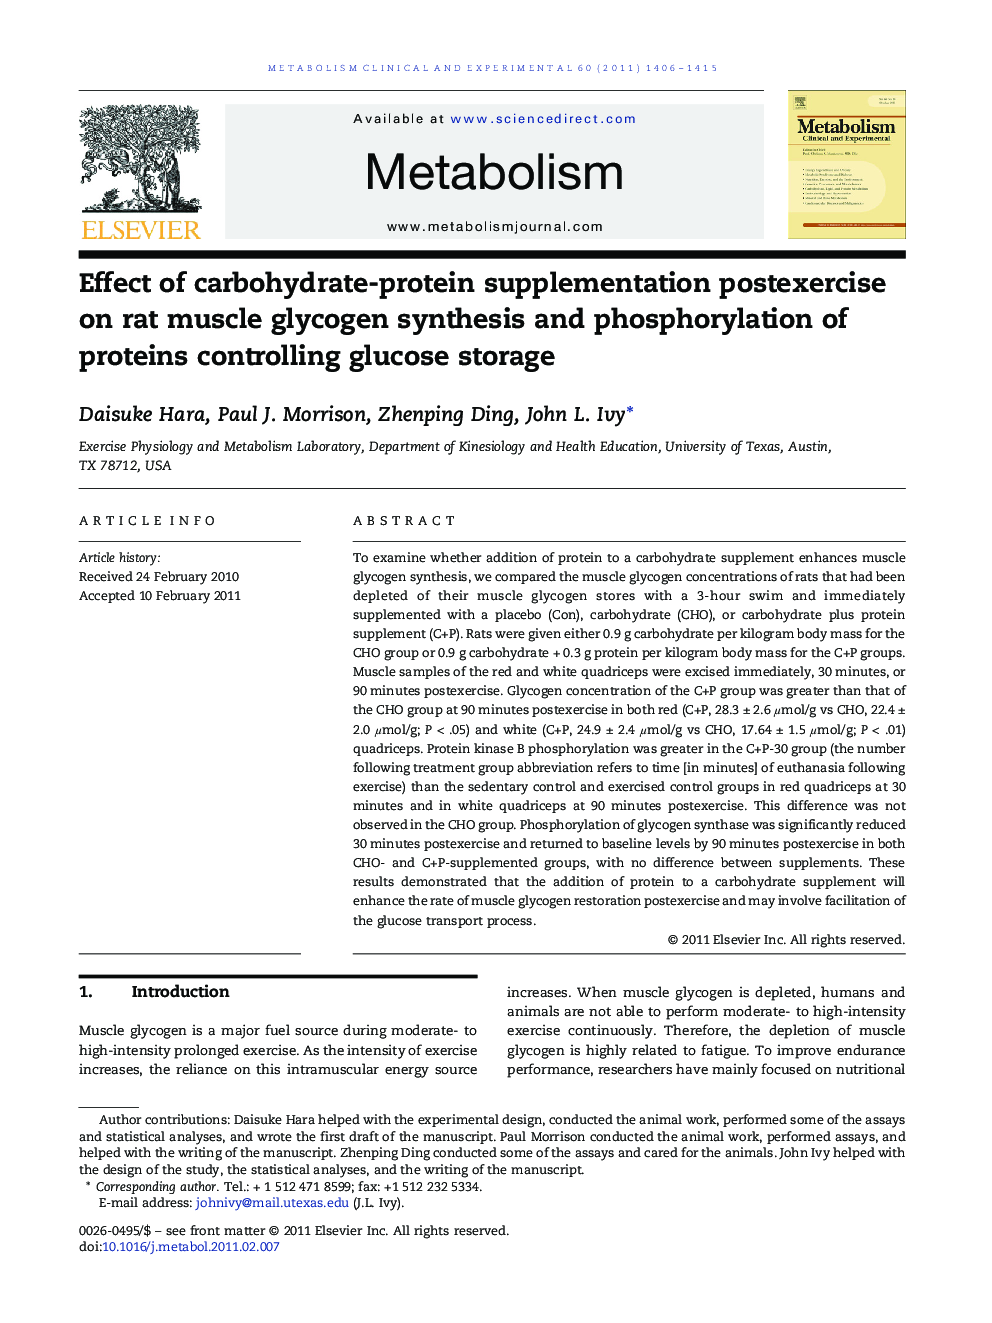 Effect of carbohydrate-protein supplementation postexercise on rat muscle glycogen synthesis and phosphorylation of proteins controlling glucose storage